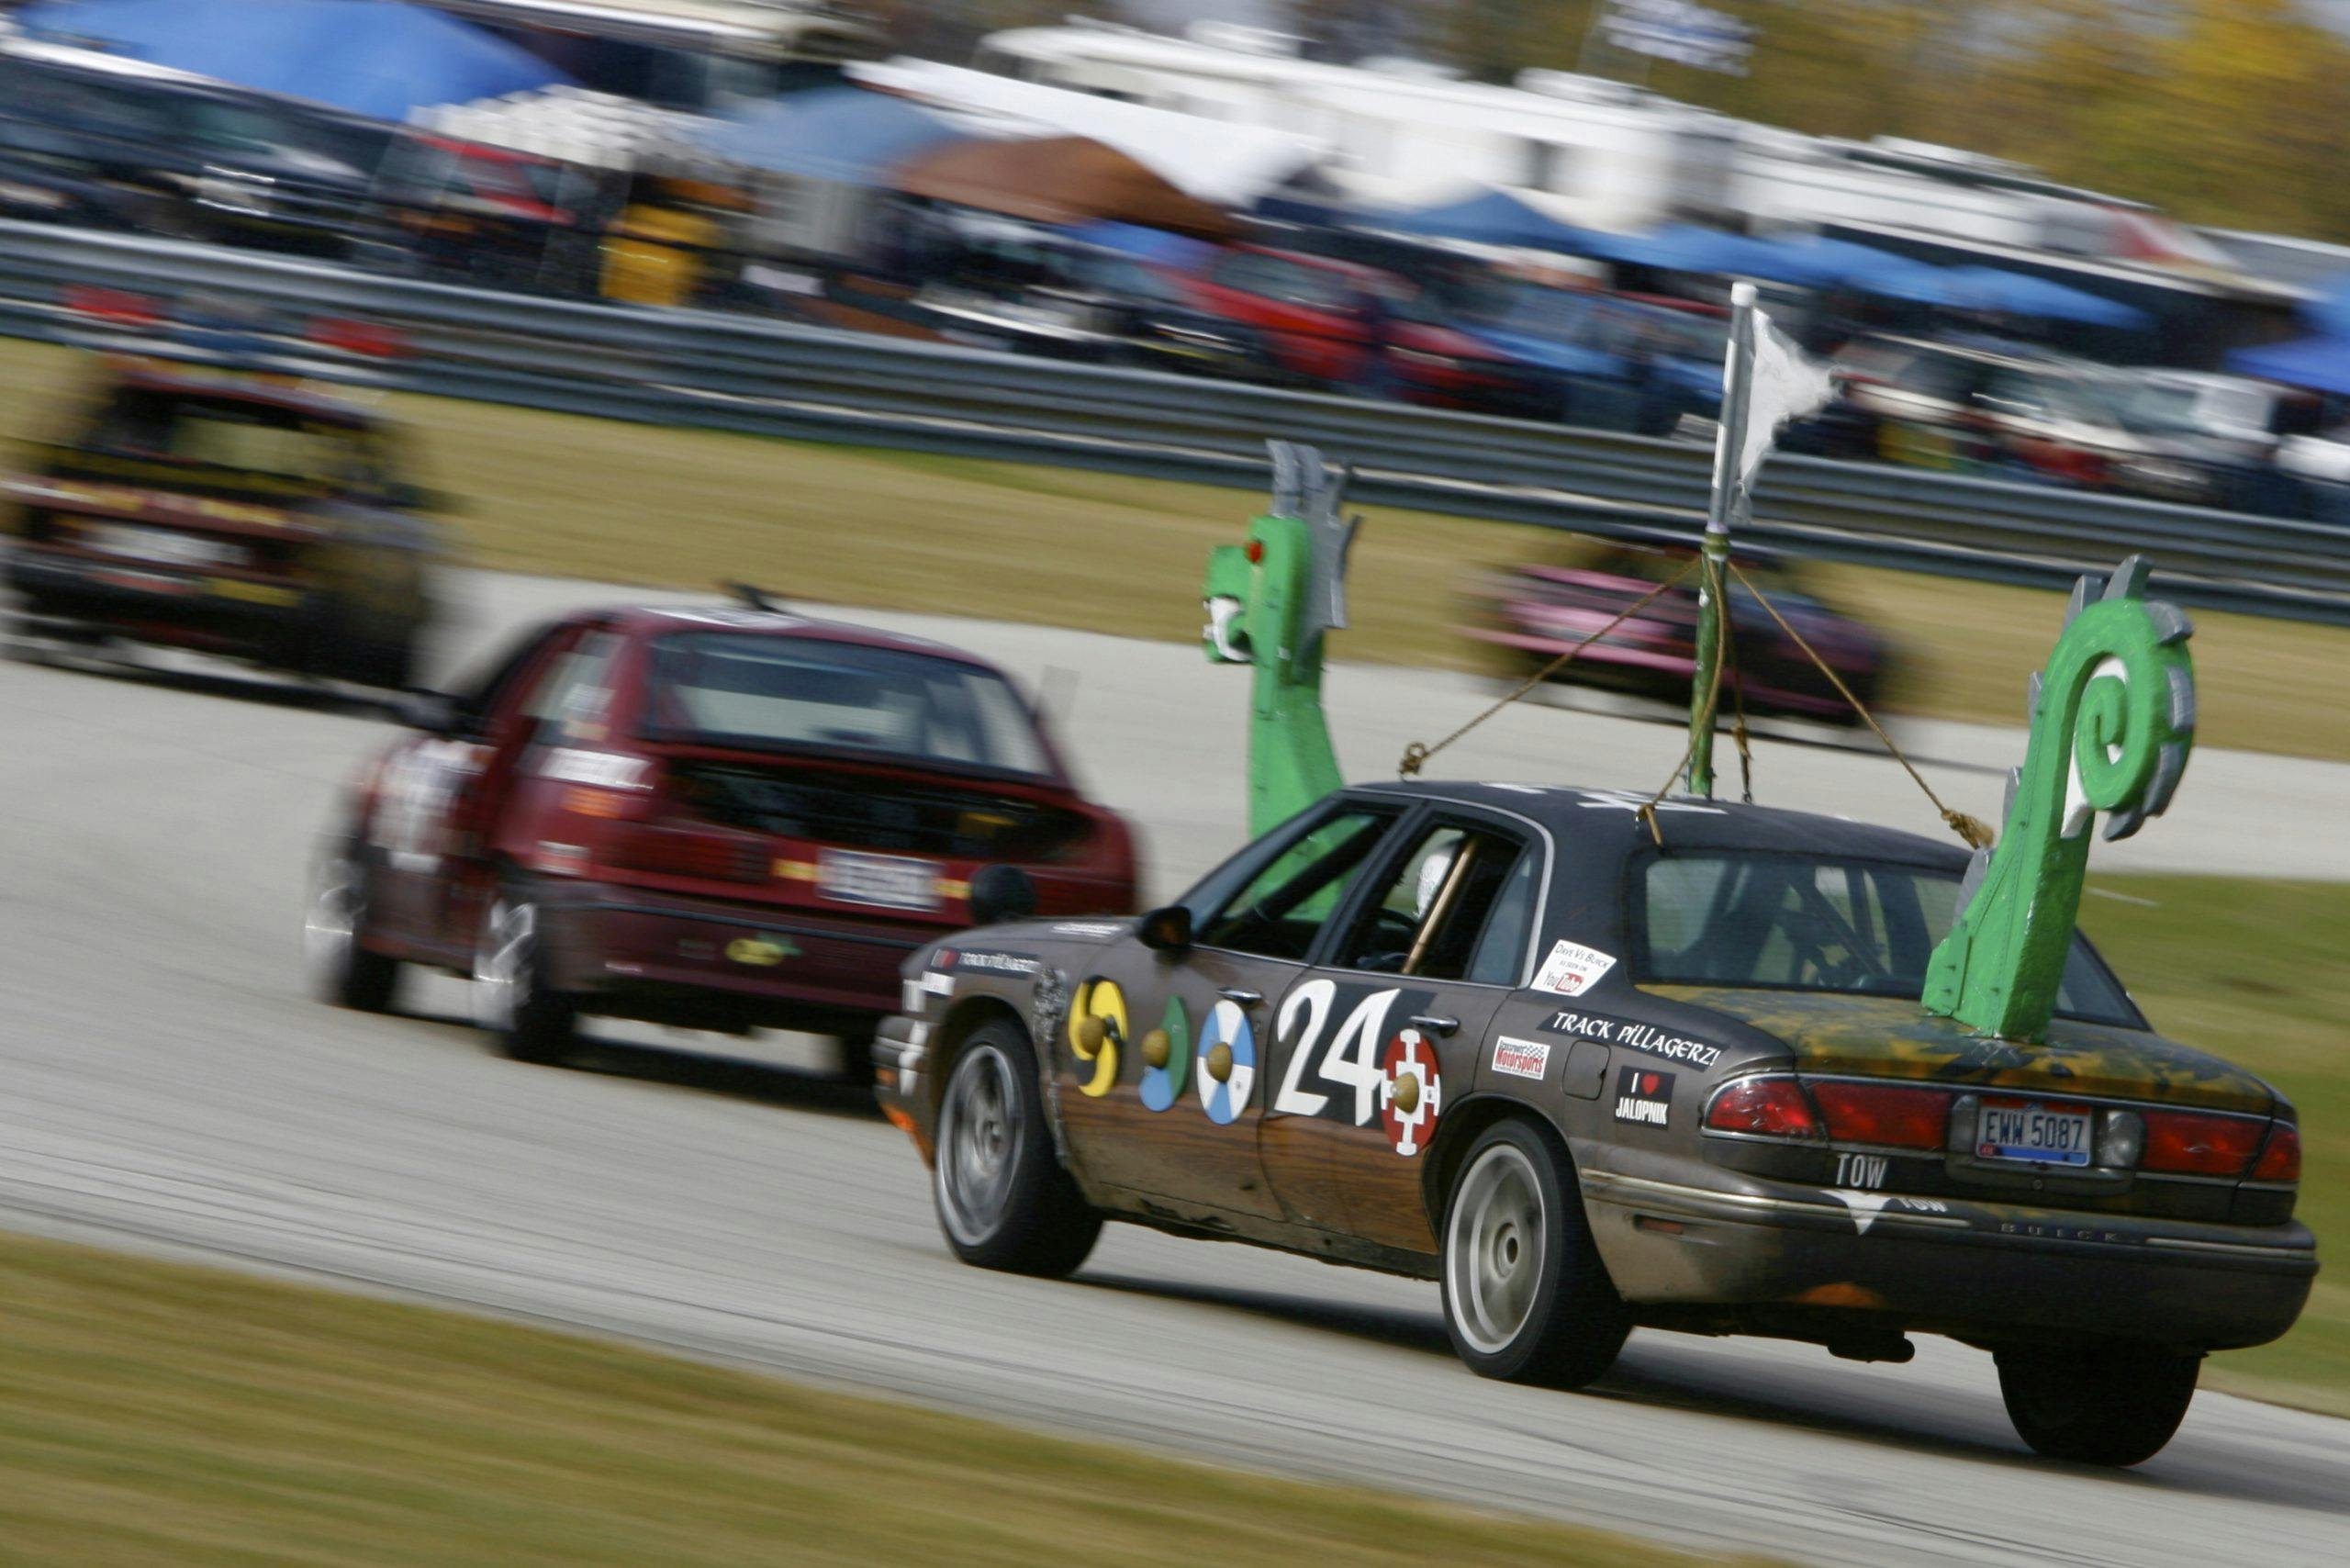 Dragon car competes in the 24 Hours of Lemons